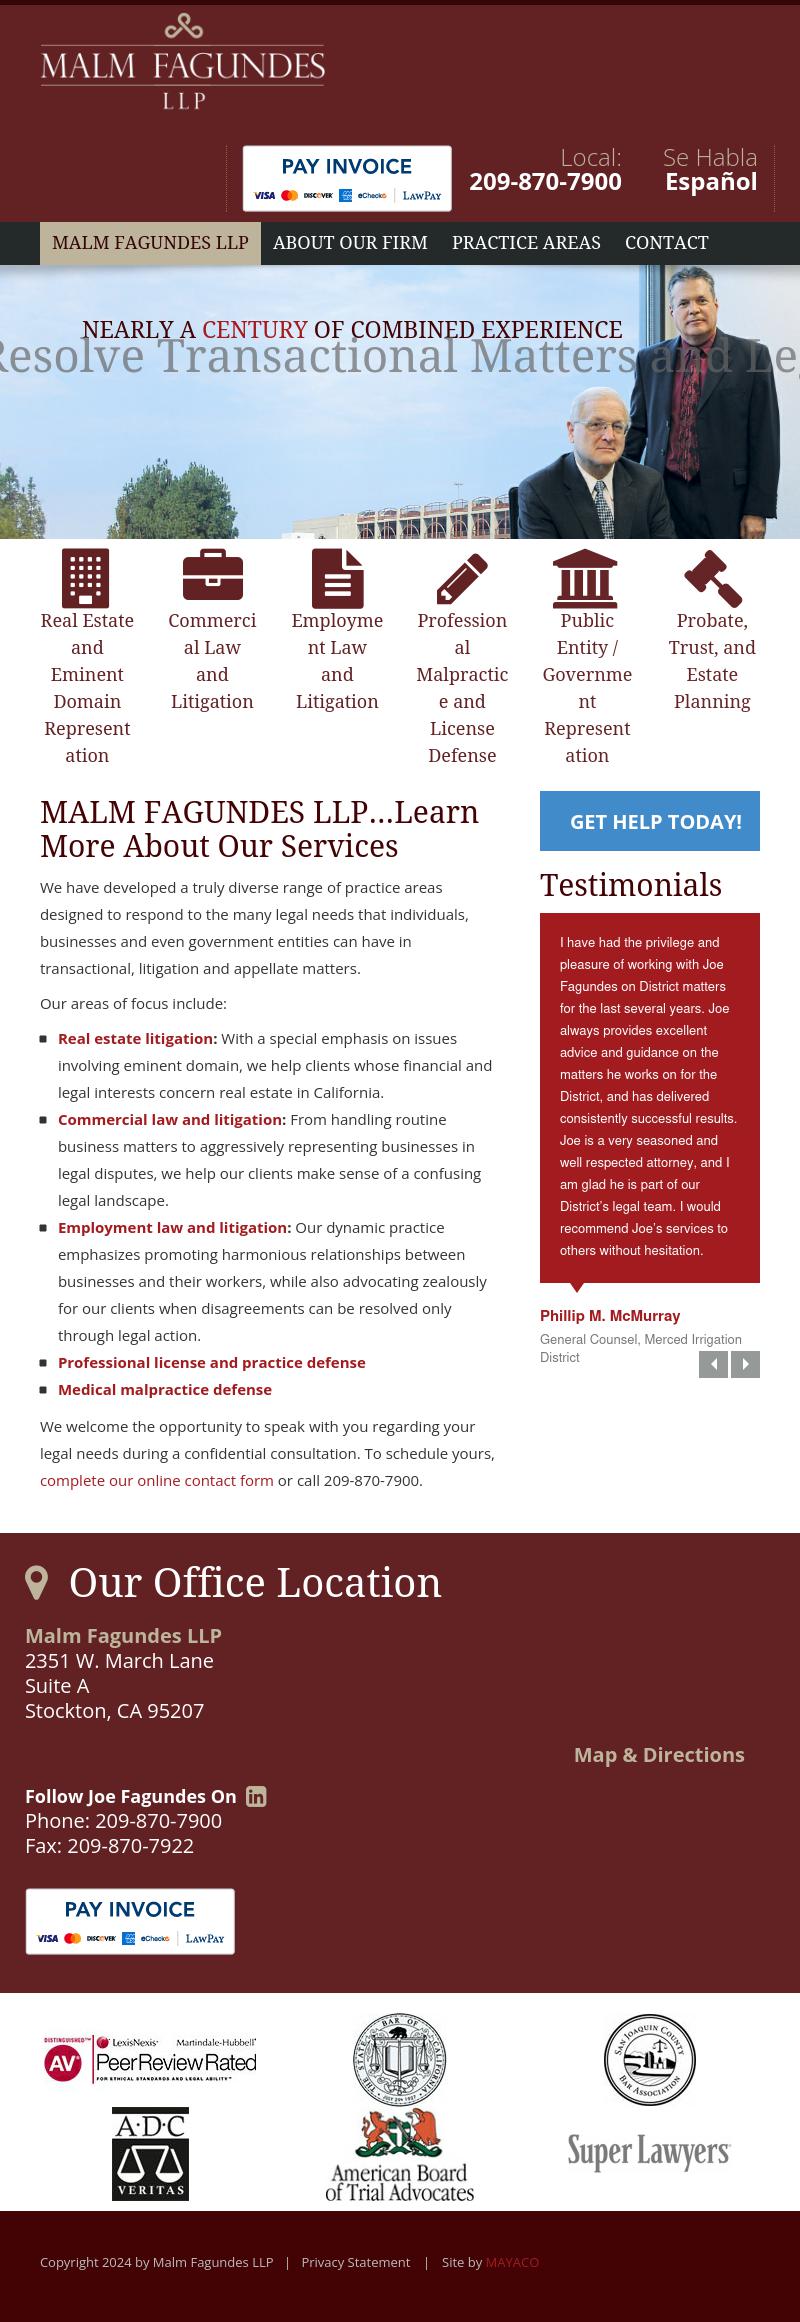 Malm Fagundes LLP - Stockton CA Lawyers